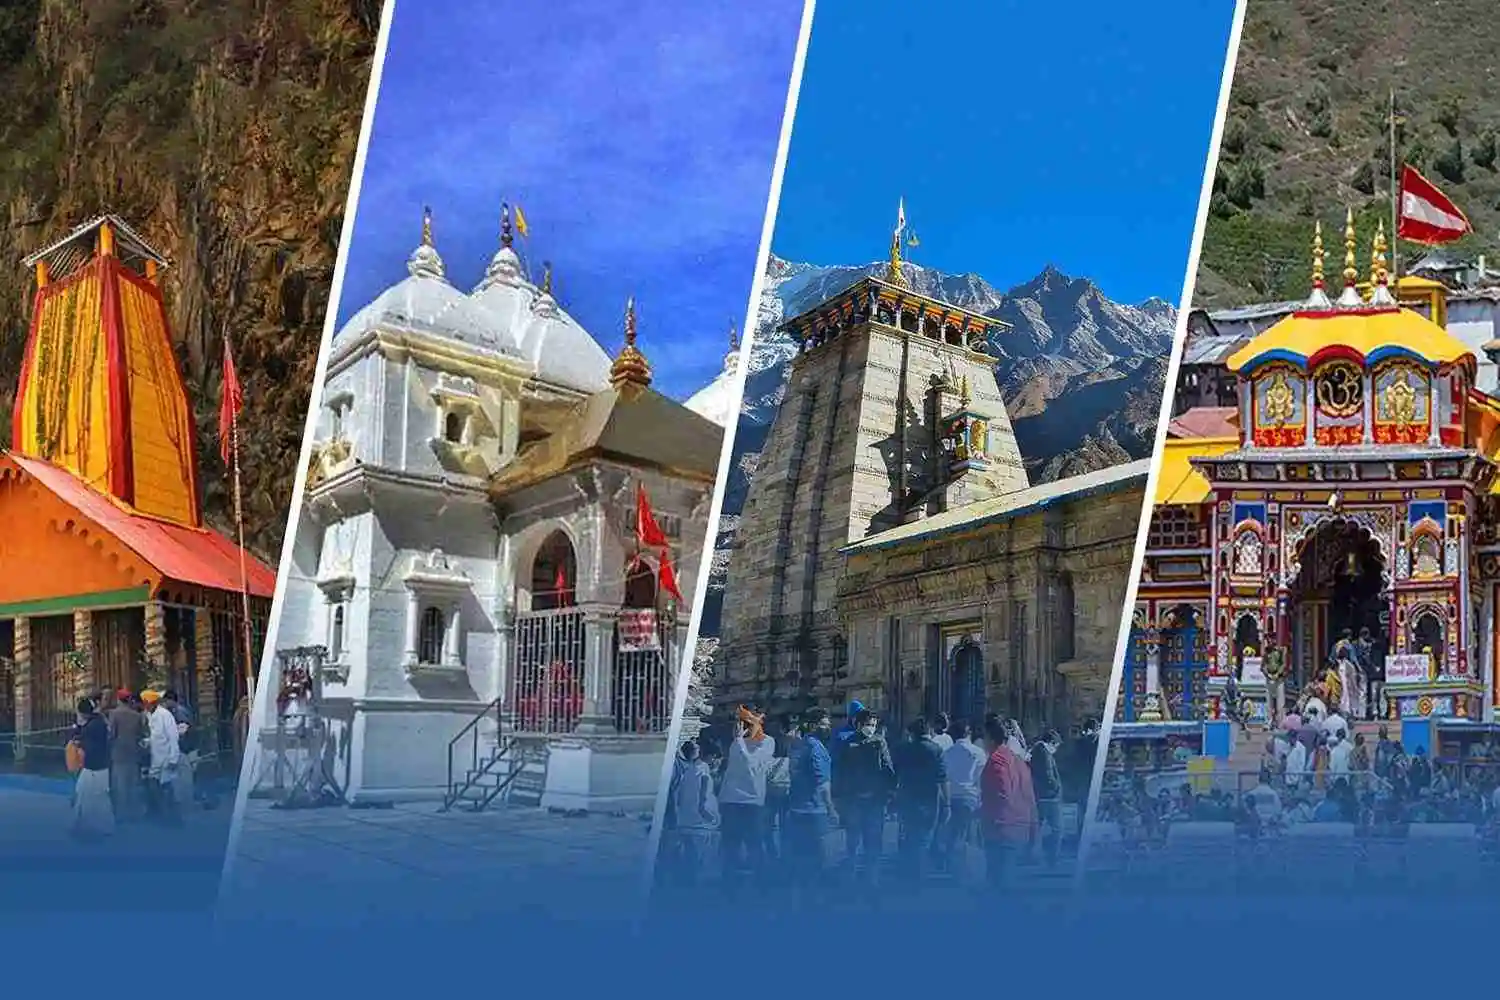 Registration For ‘Char Dham Yatra’ Begins: Visit The Tourism Portal To Know About The Pilgrimage   